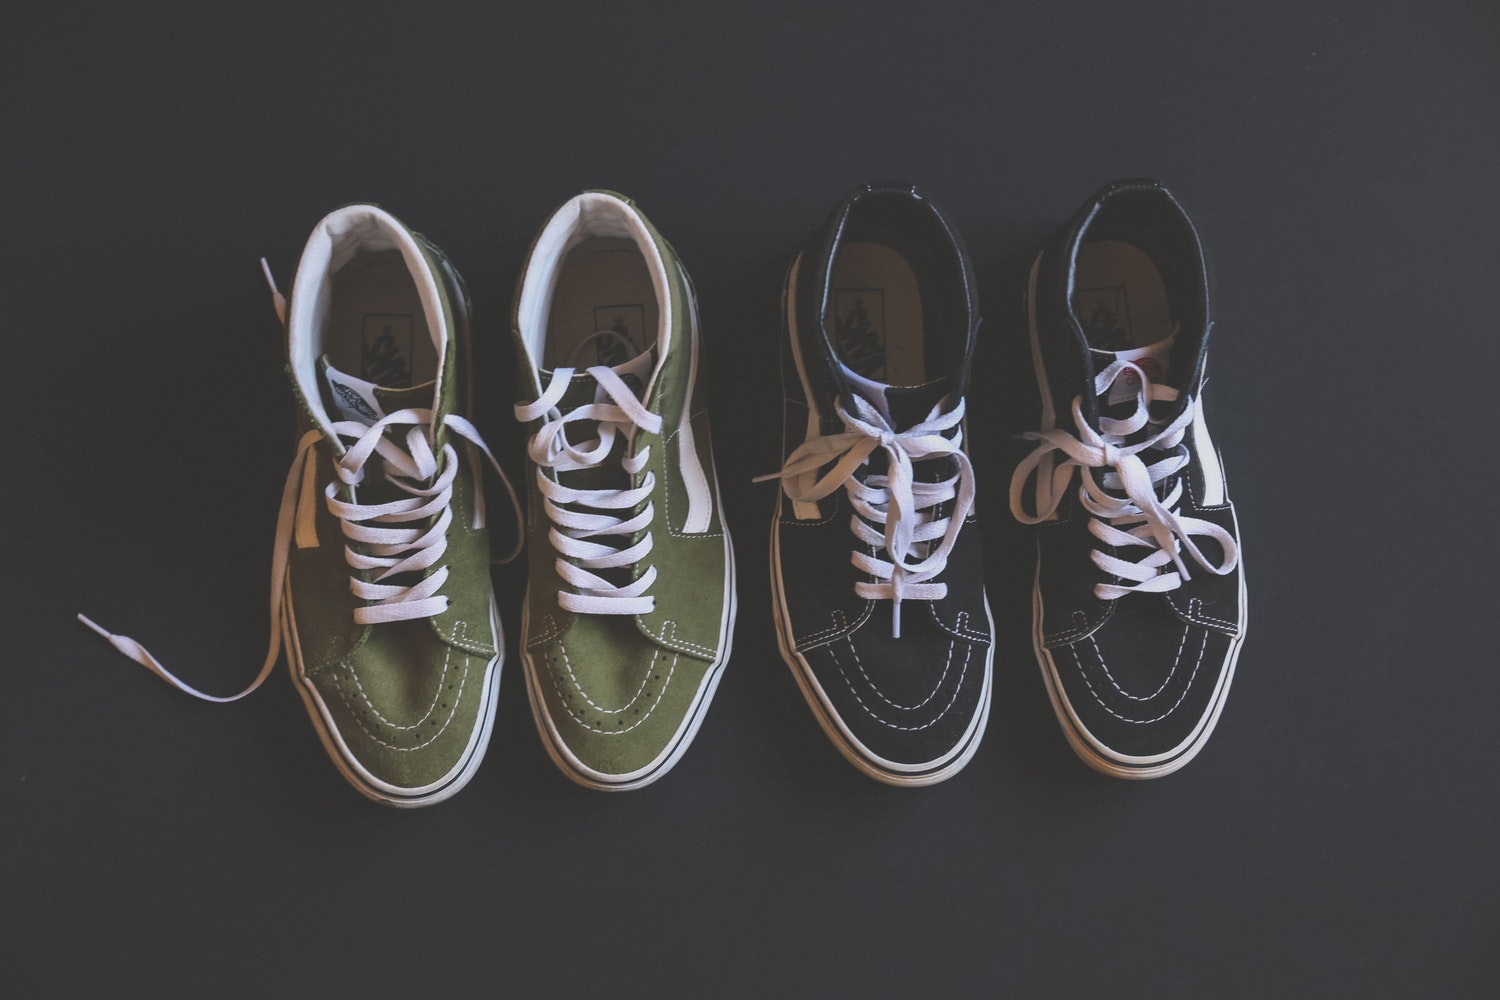 how much does vans make a year